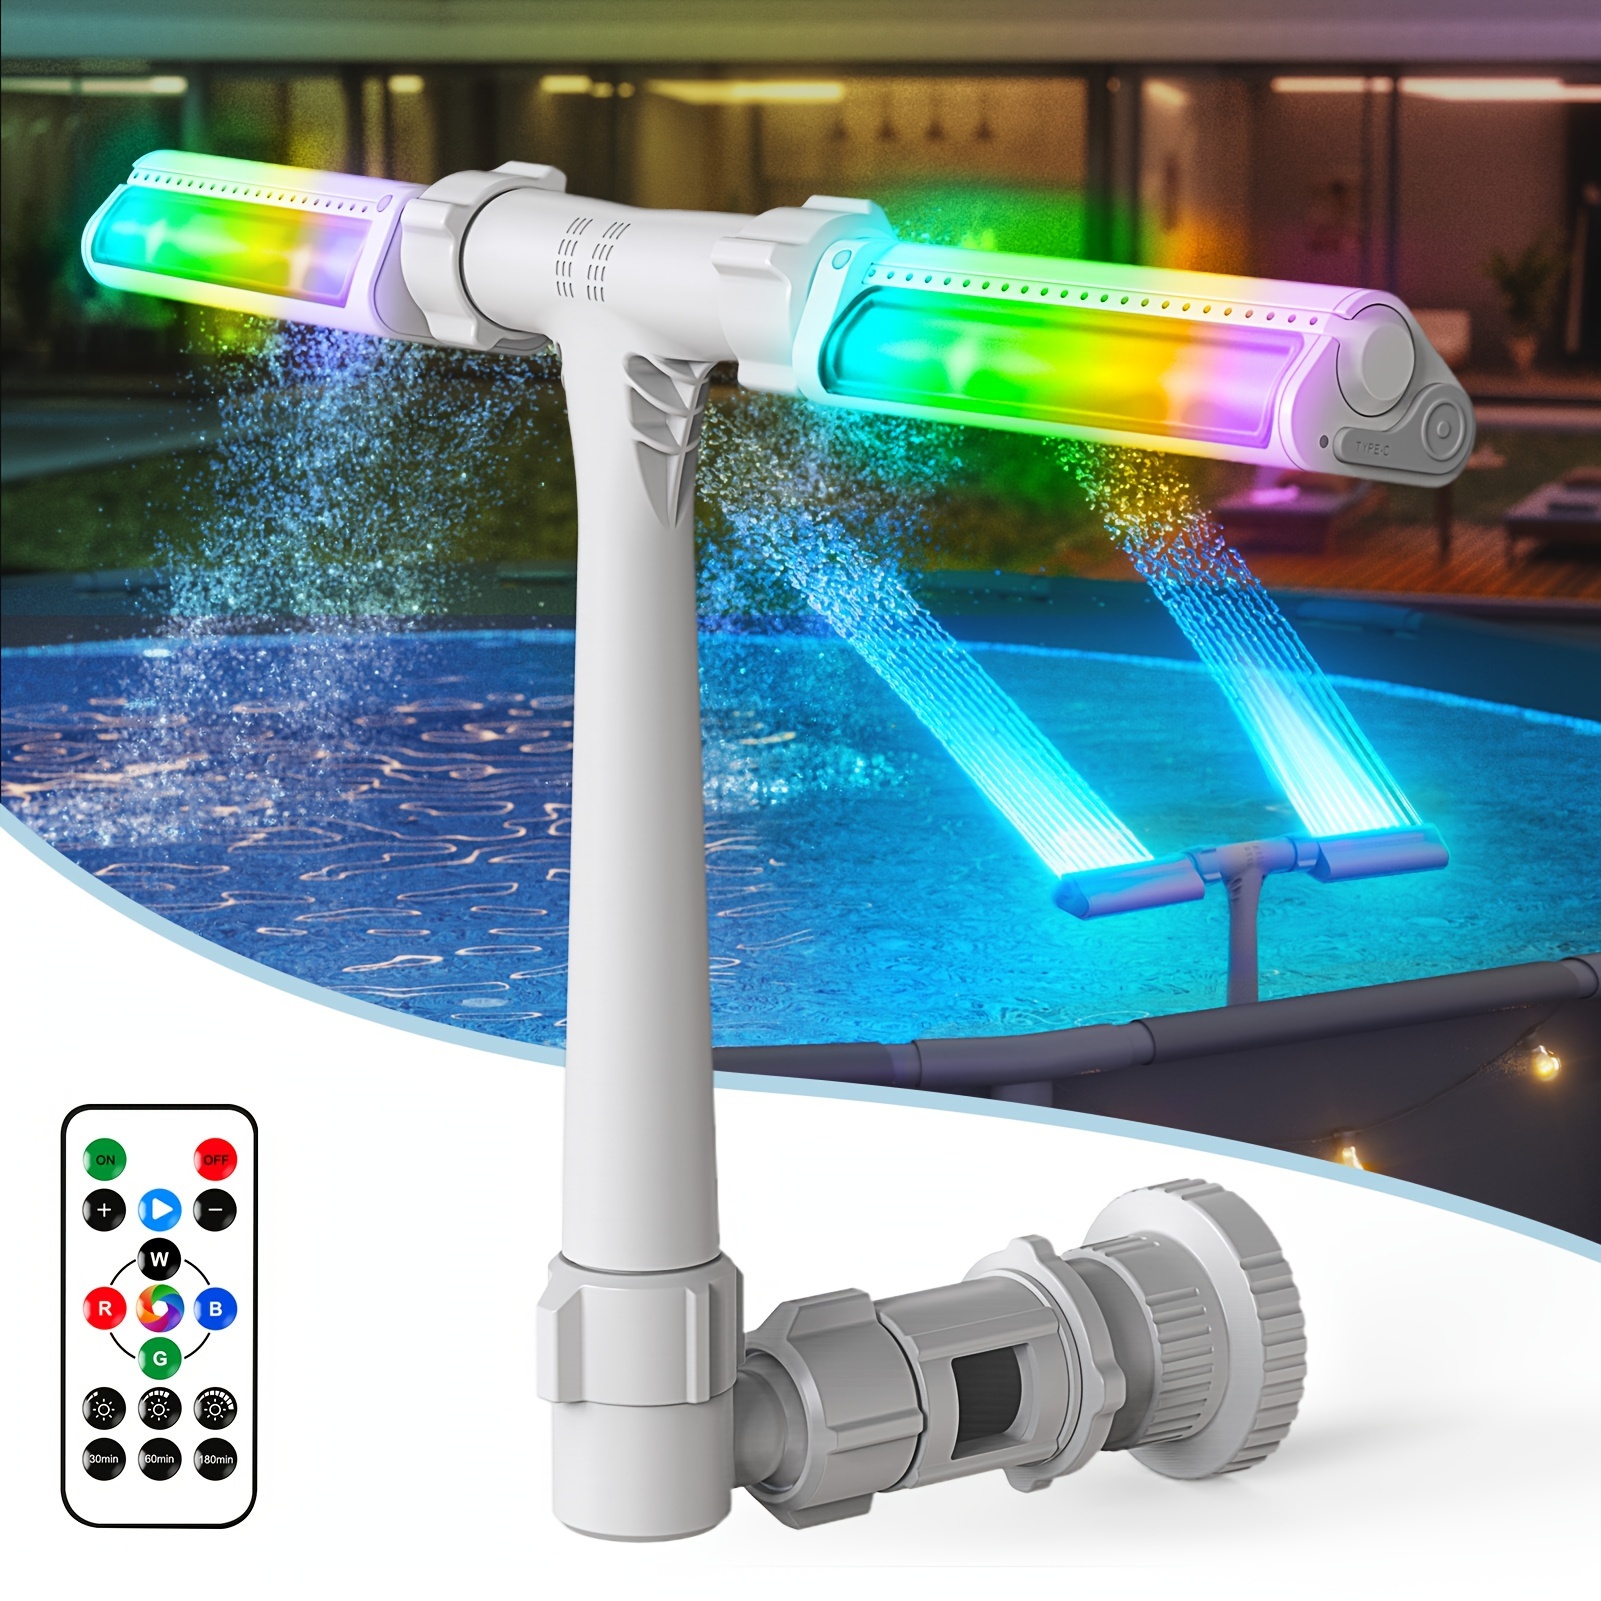 

Pool Fountain With 7-color Led Lights, Above/inground Pool Fountain Lights With Remote Control, Adjustable Pool Sprinkler Fountain With Dual Spray Heads, Above Ground Pool Cooling System